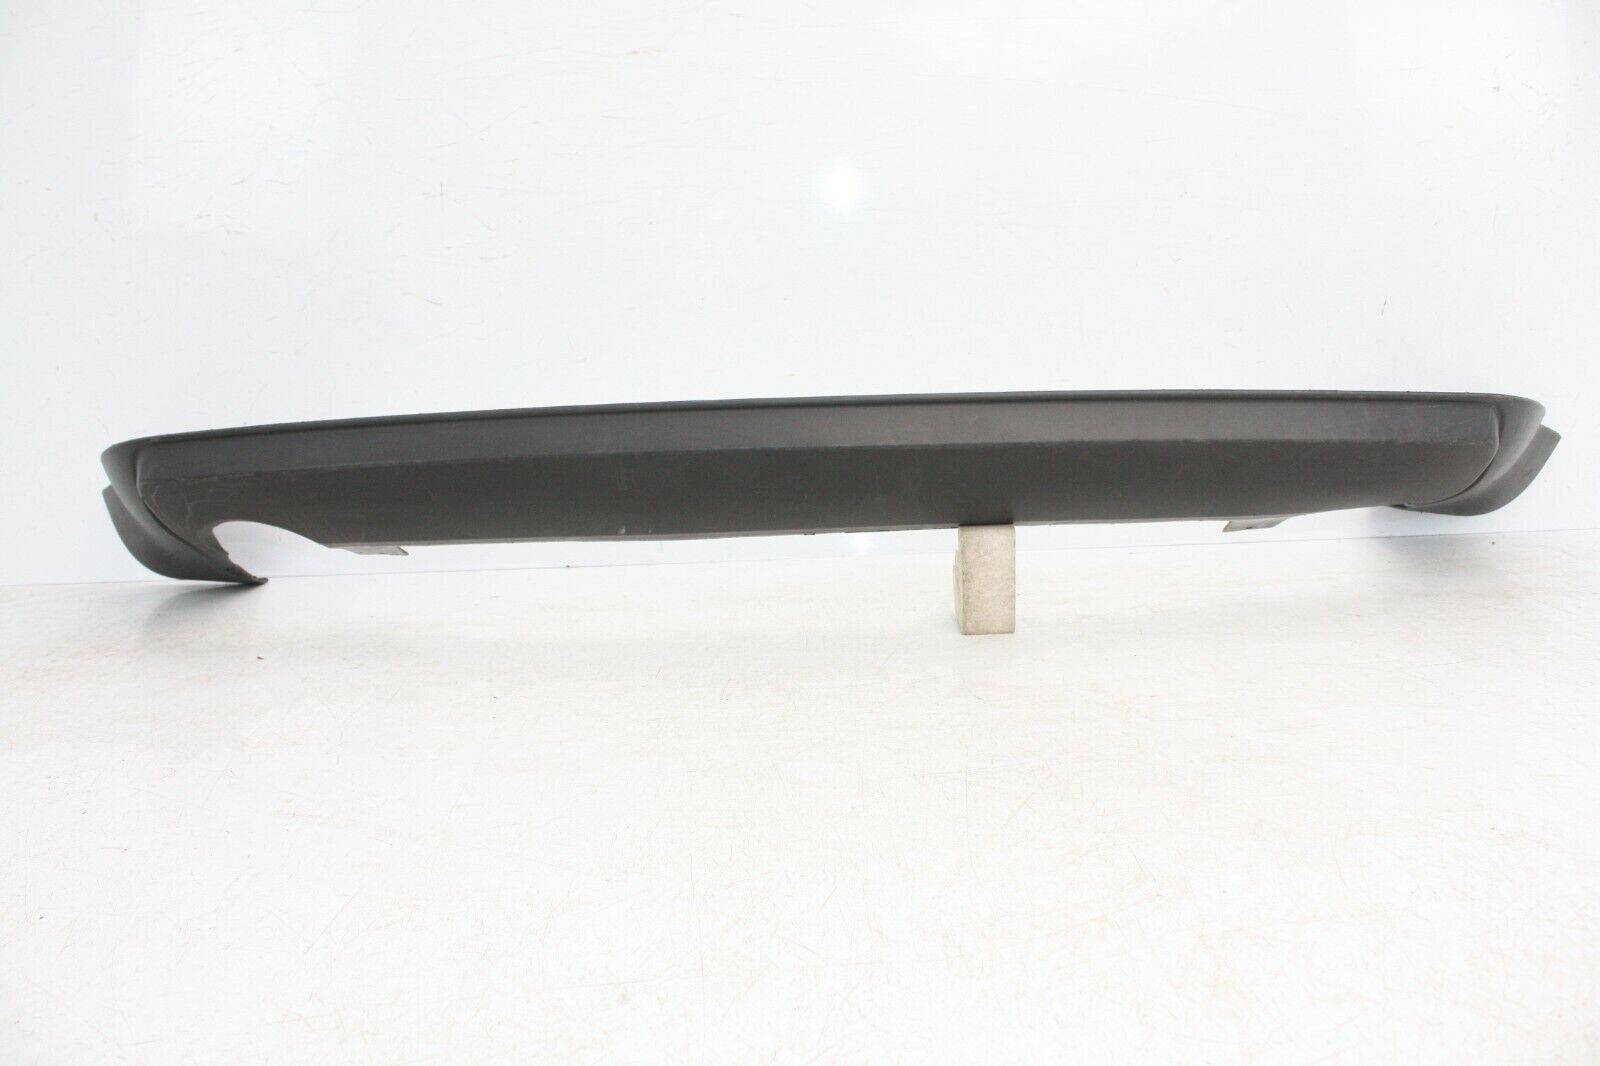 Ford C Max Rear Bumper Lower Section 2004 To 2007 3M51 R17A894 AB 175902867116